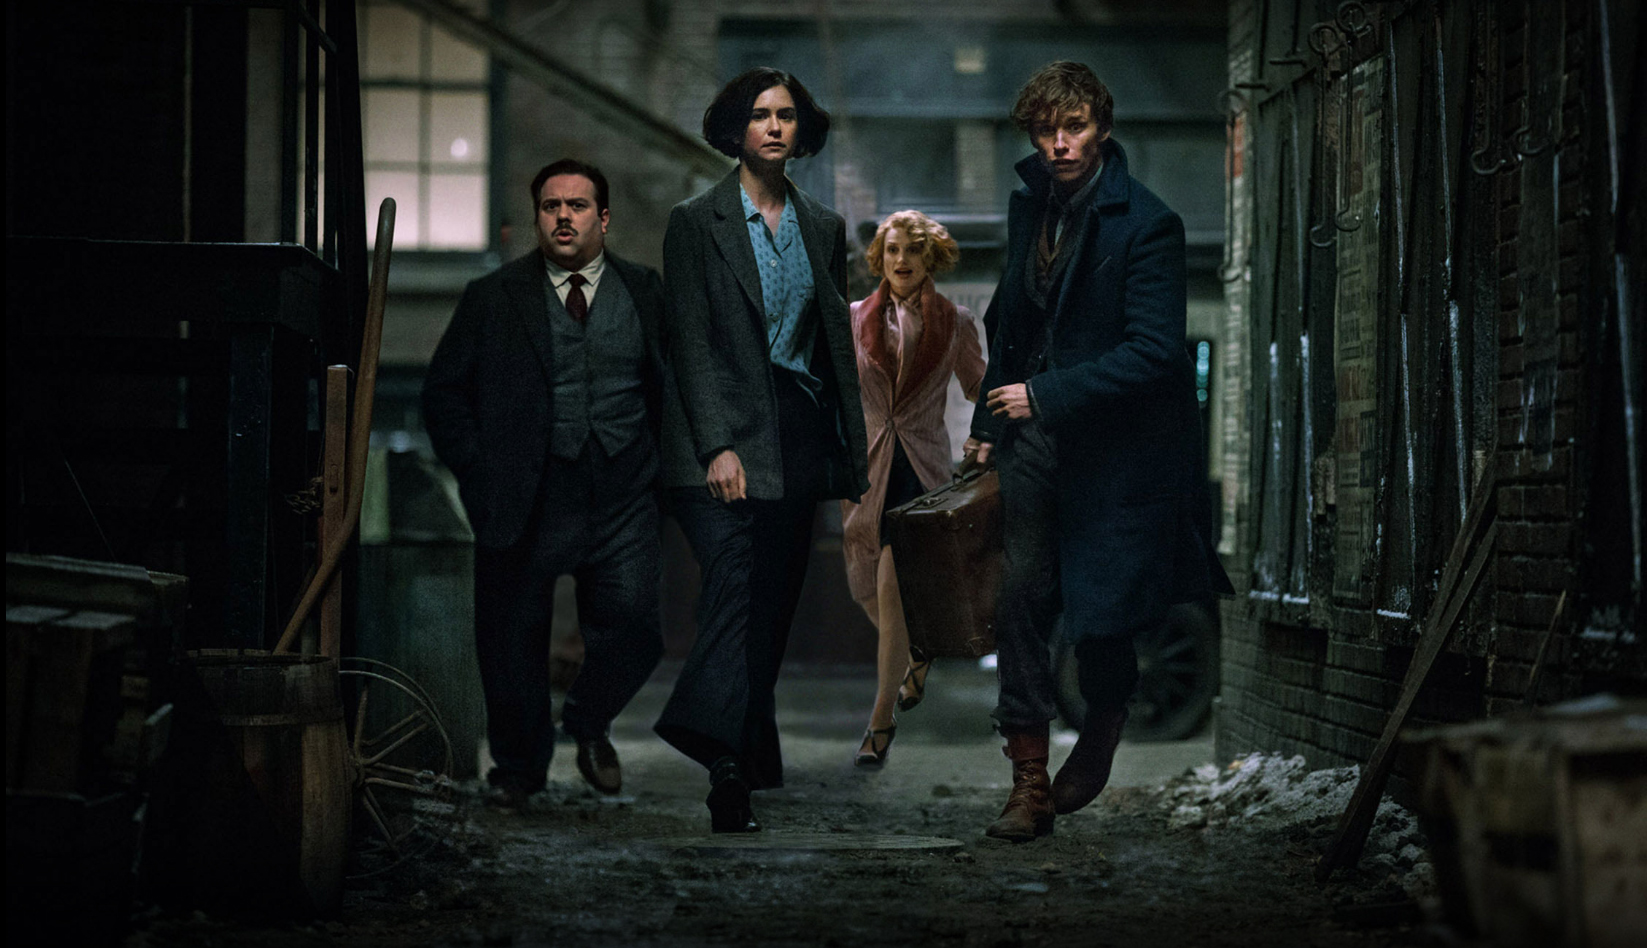 Nuevo Trailer de Fantastic Beasts and Where to Find them